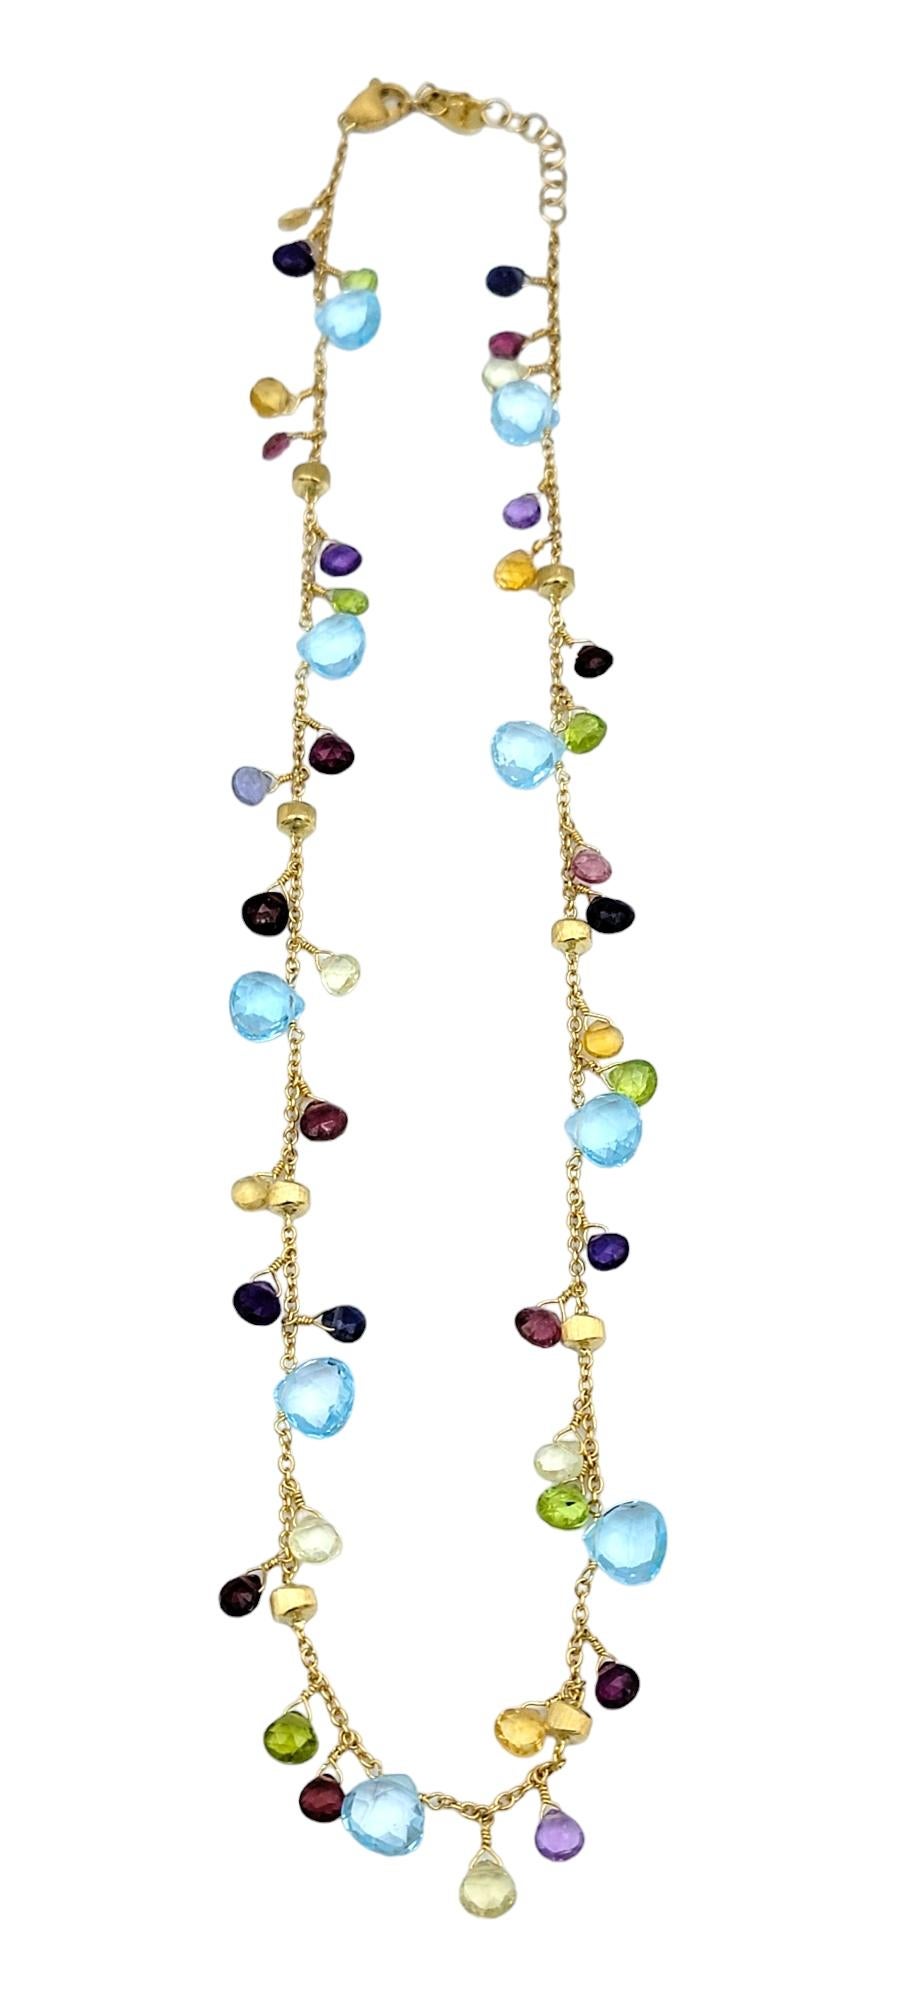 This gorgeous Marco Bicego Paradise multi-colored gemstone necklace features vibrant briolette-cut stones set in 18 karat yellow gold. Each stone, ranging in hues from deep blues and greens to vivid pinks and purples, adds a pop of color and